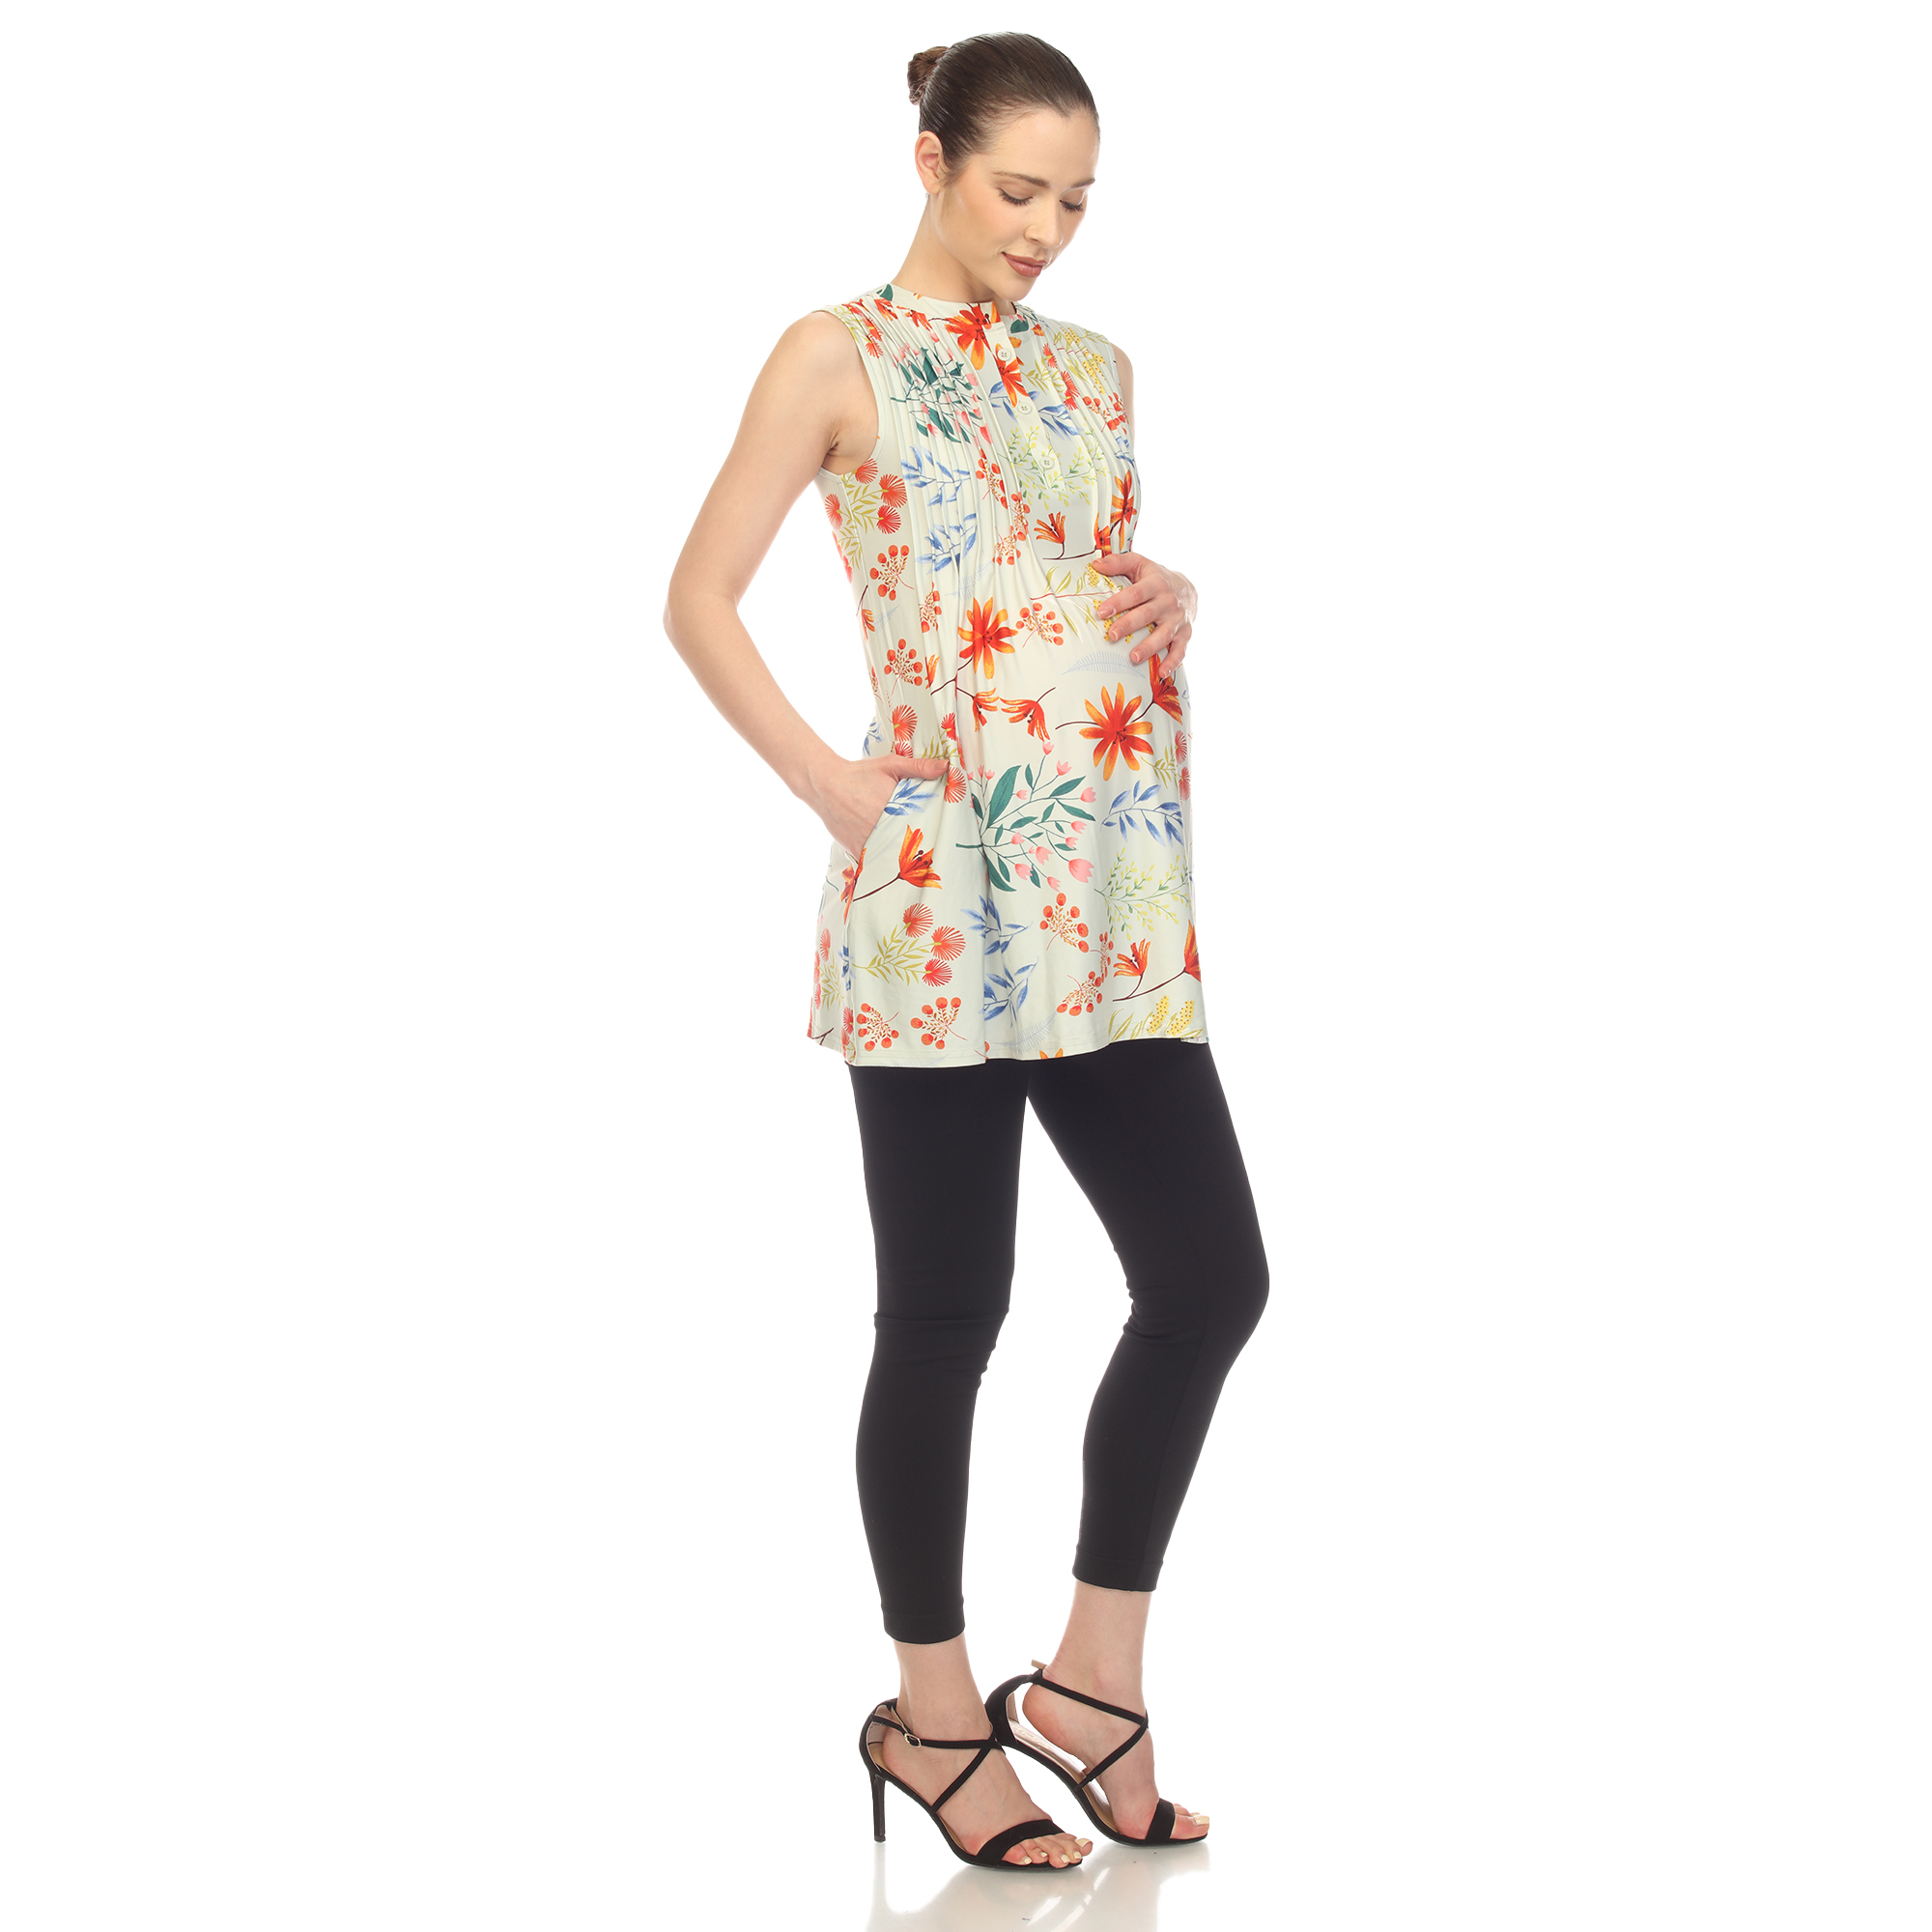 White Mark Women's Maternity Floral Sleeveless Tunic Top - Sage, Small